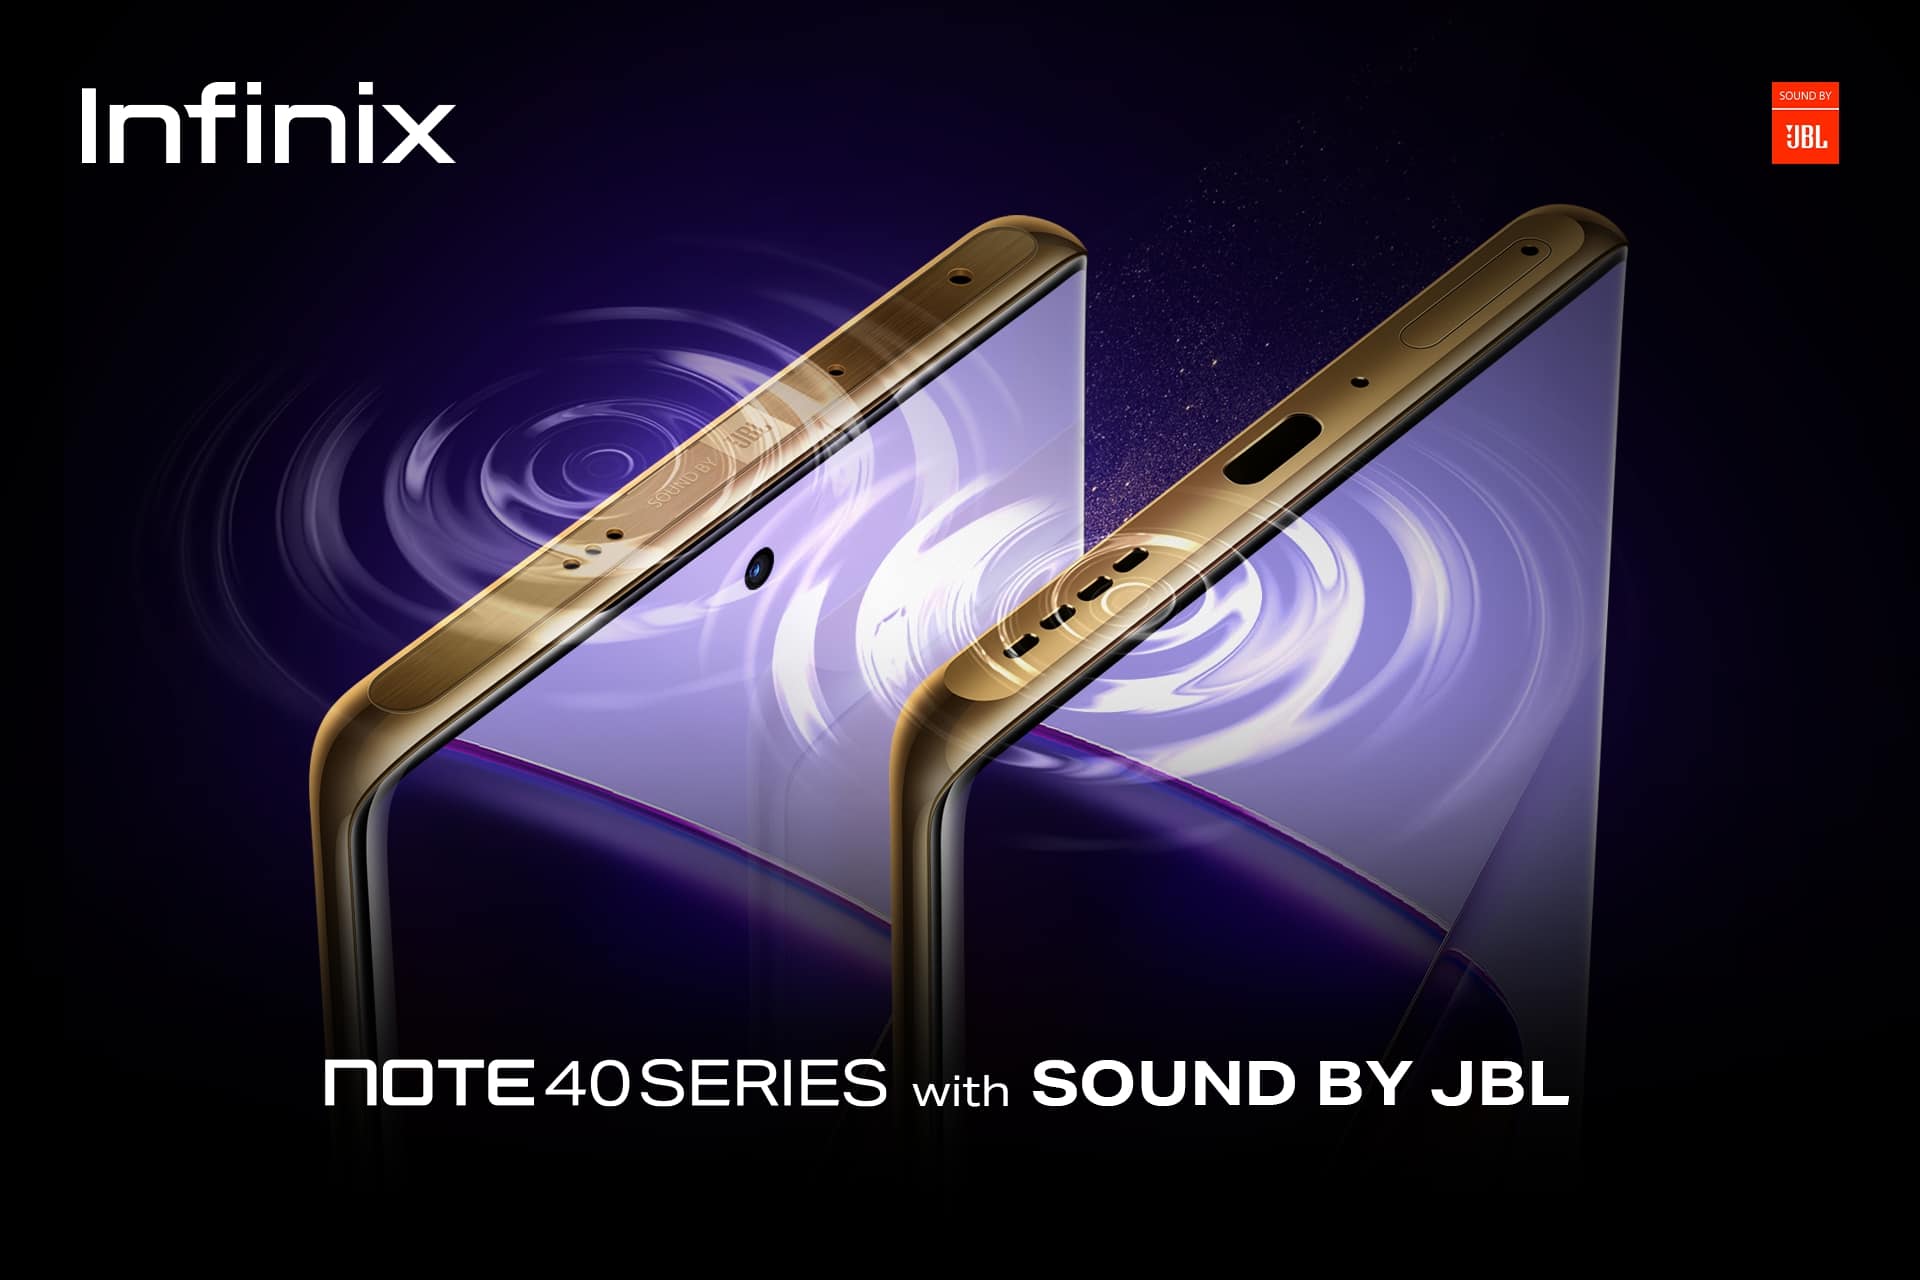 INFINIX PARTNERS WITH JBL TO ELEVATE SOUND EXPERIENCE FOR NOTE 40 SERIES UNVEILING THE ACOUSTIC BRILLIANCE WITH SOUND BY JBL